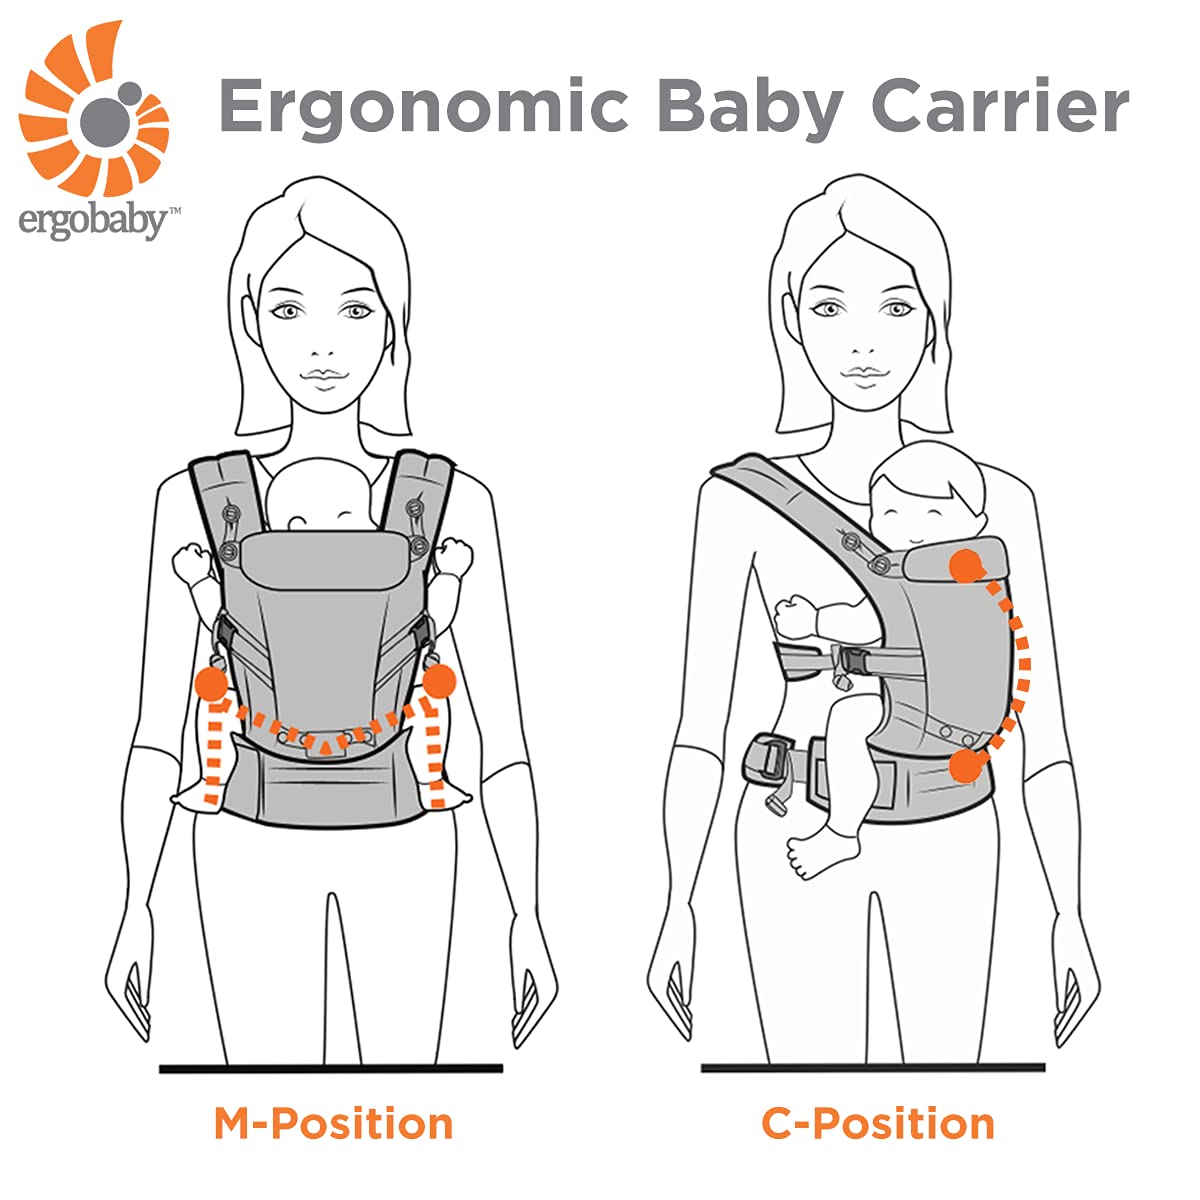 Ergobaby 360 All-Position Baby Carrier with Lumbar Support (12-45 Pounds), Carbon Grey, Cool Air Mesh